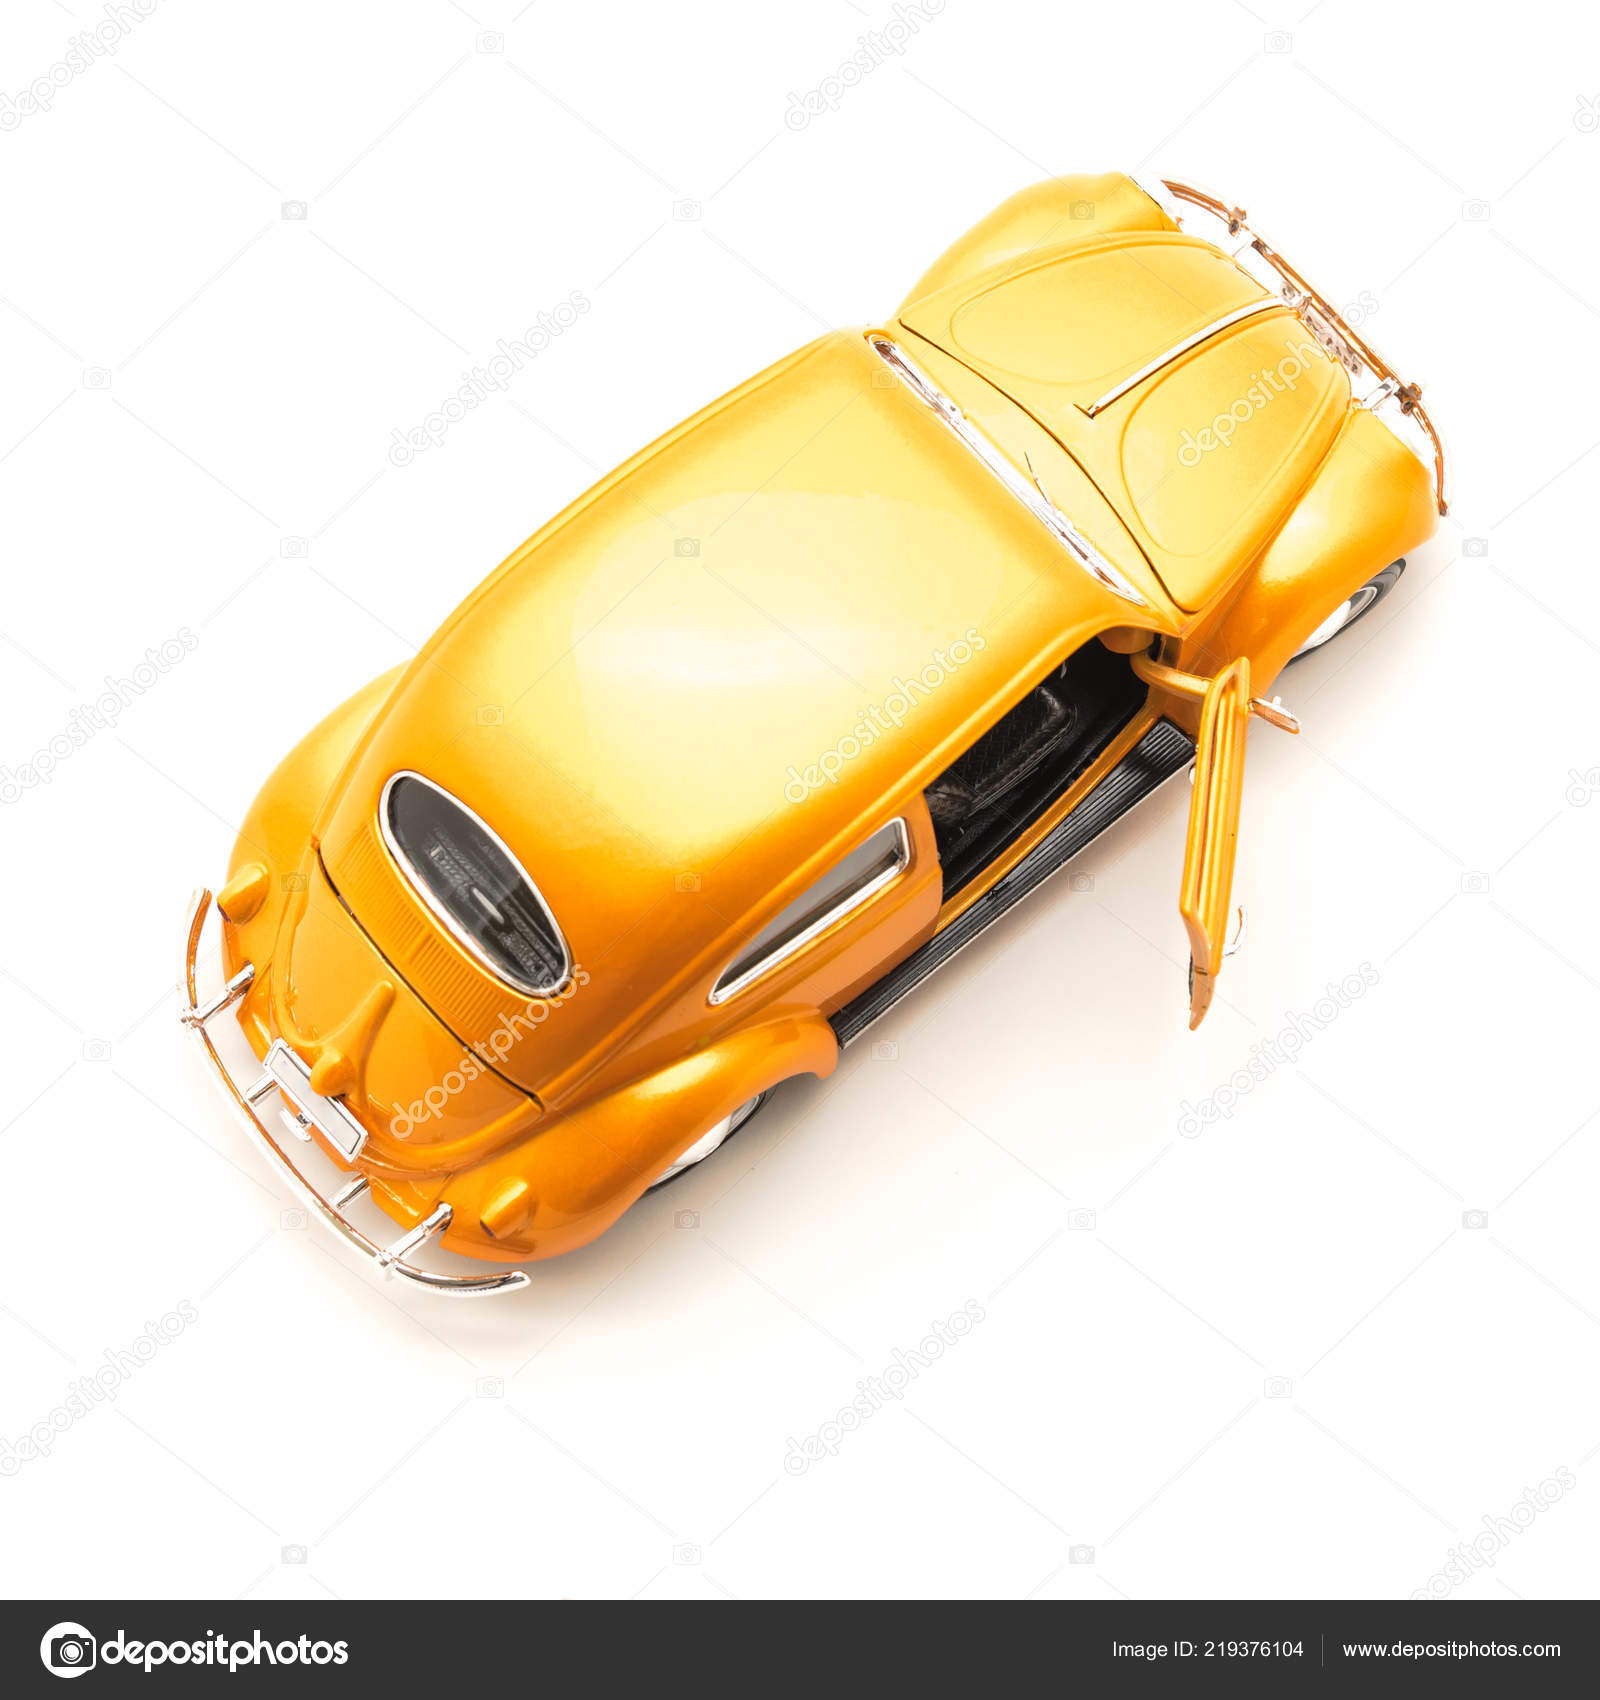 toy cars with doors that open up